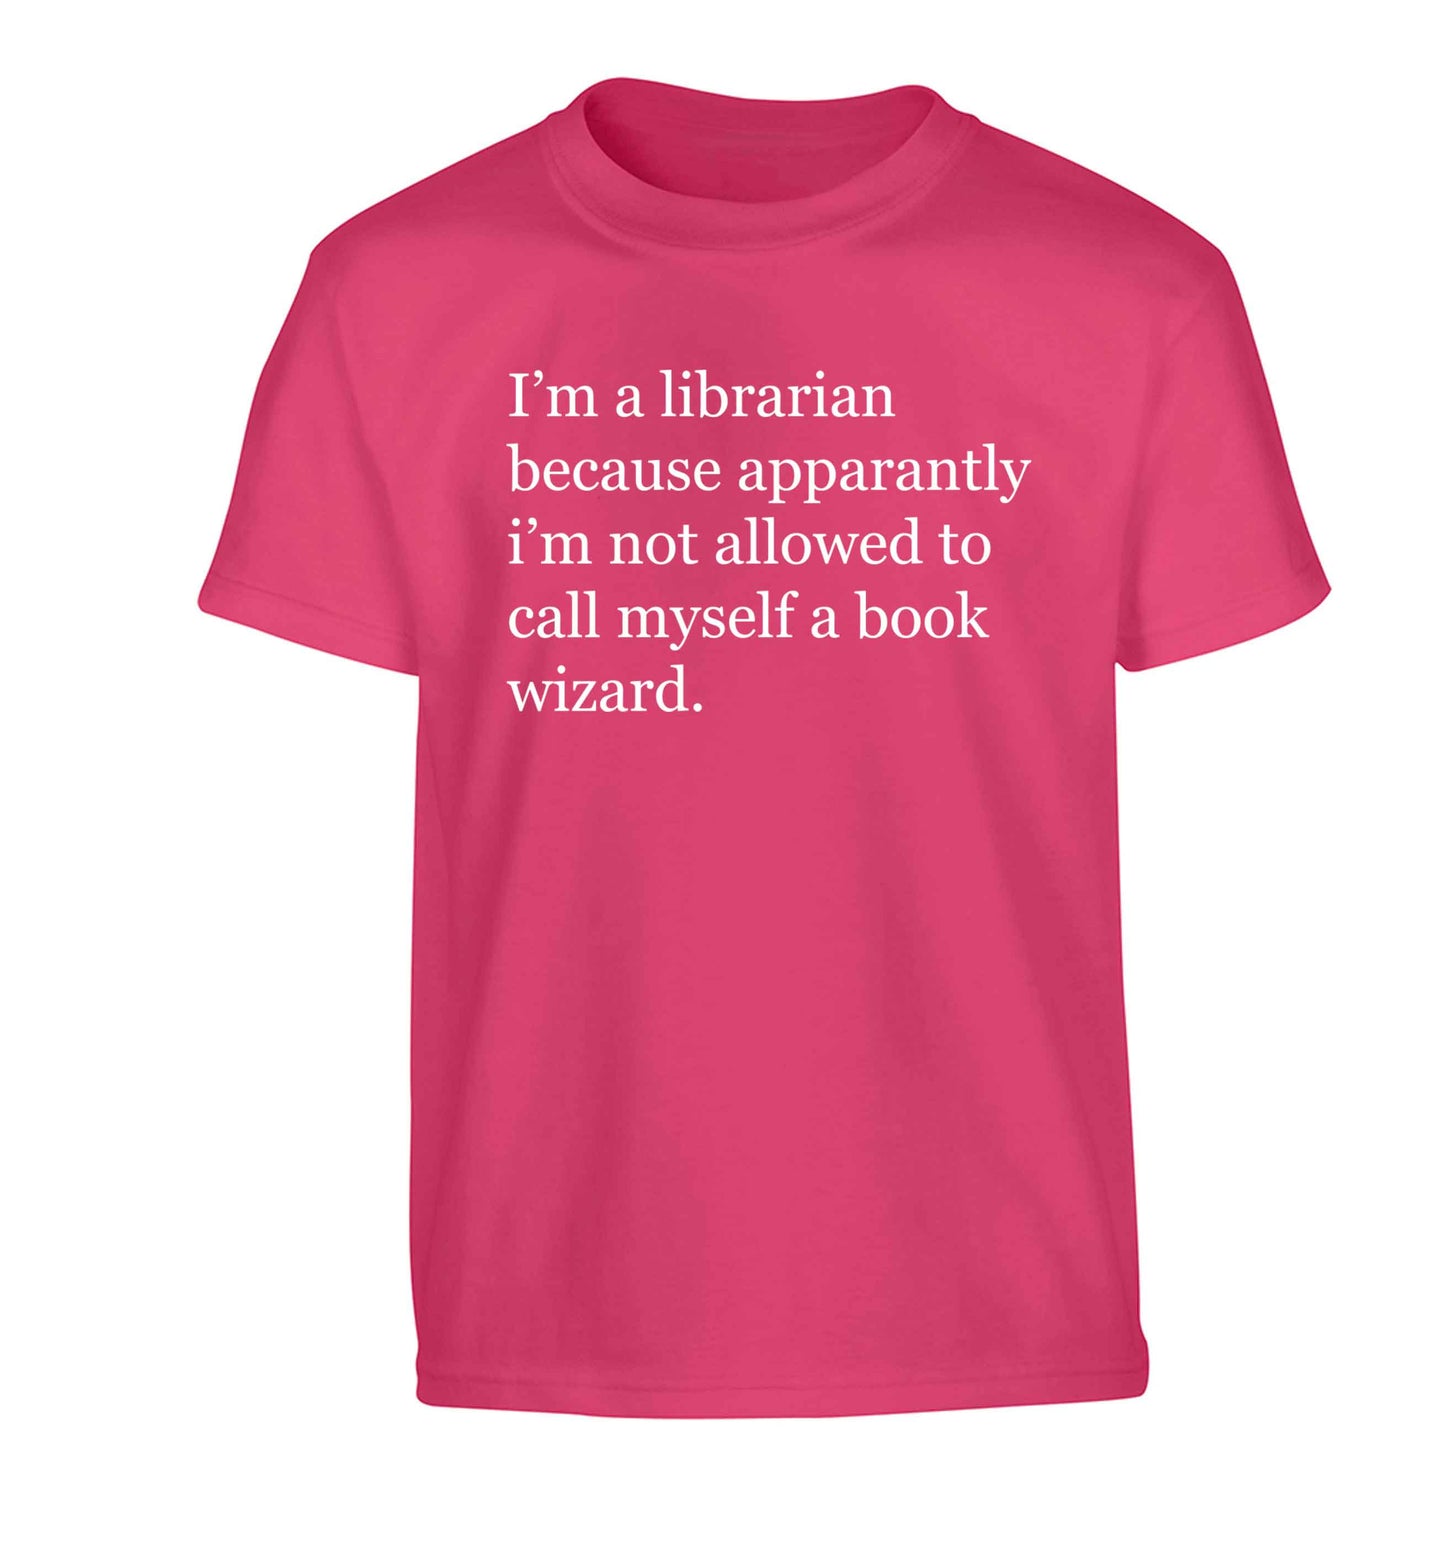 iÕm a librarian because apparantly iÕm not allowed to call myself a book wizard Children's pink Tshirt 12-13 Years